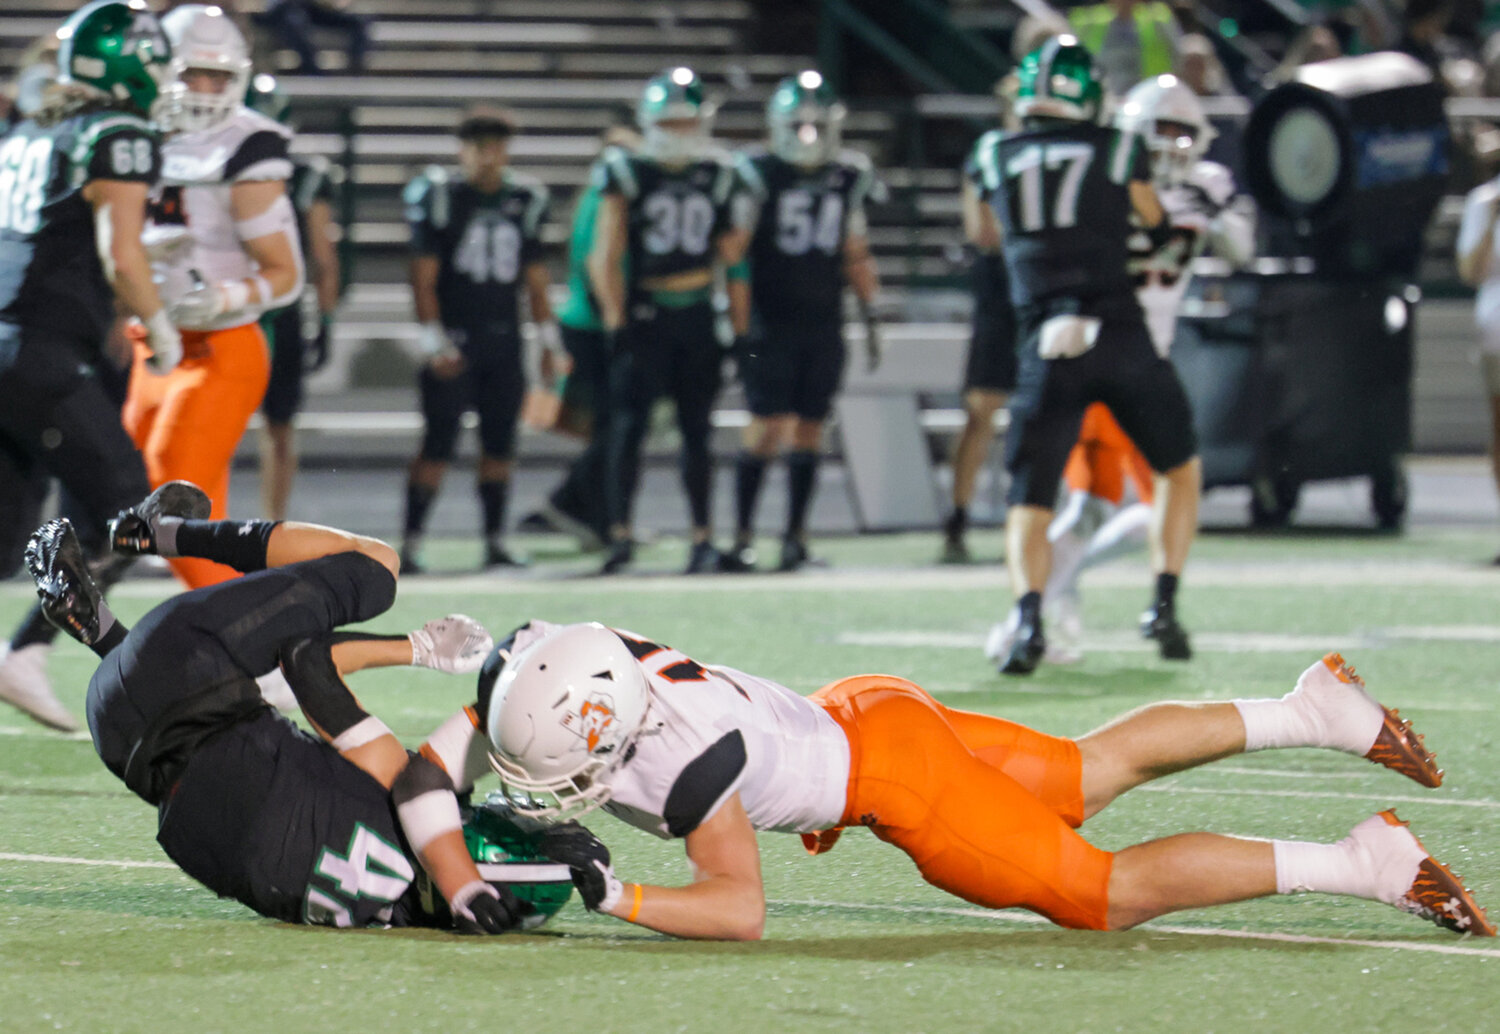 Linebacker Kutter Harrell is in on a tackle against Azle.